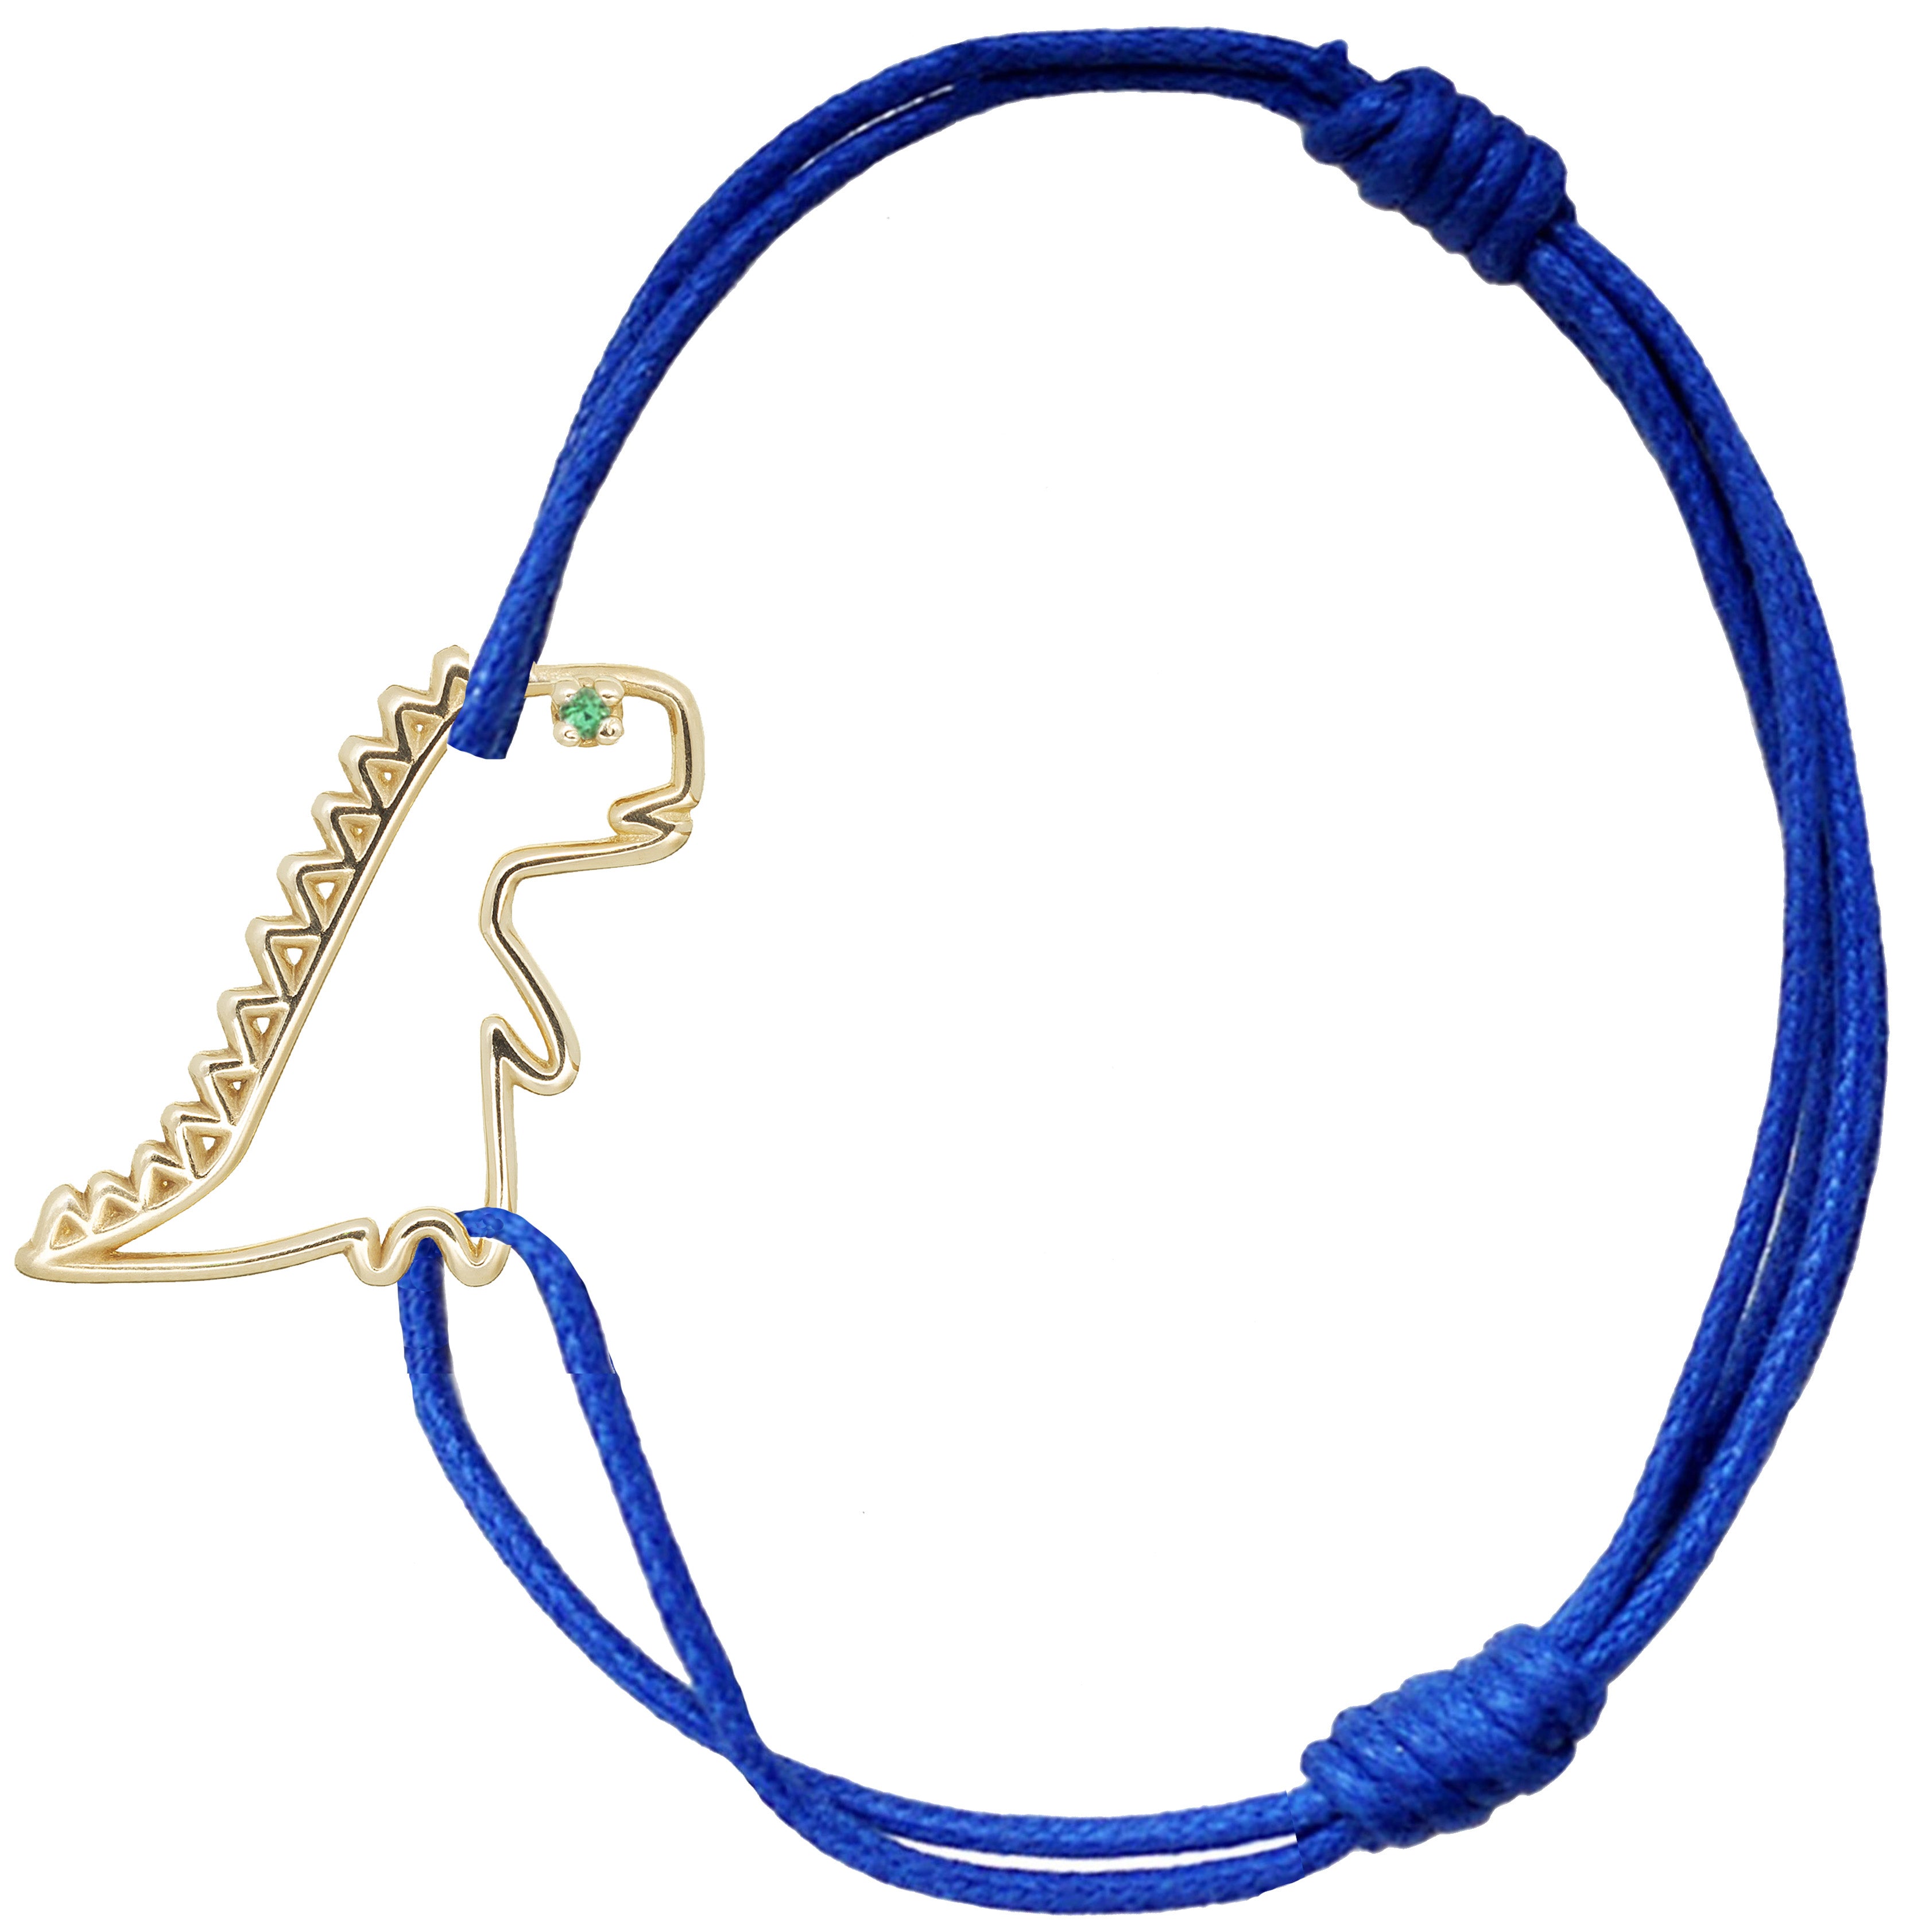 Blue cord bracelet with dinosaur shaped pendant and small emerald